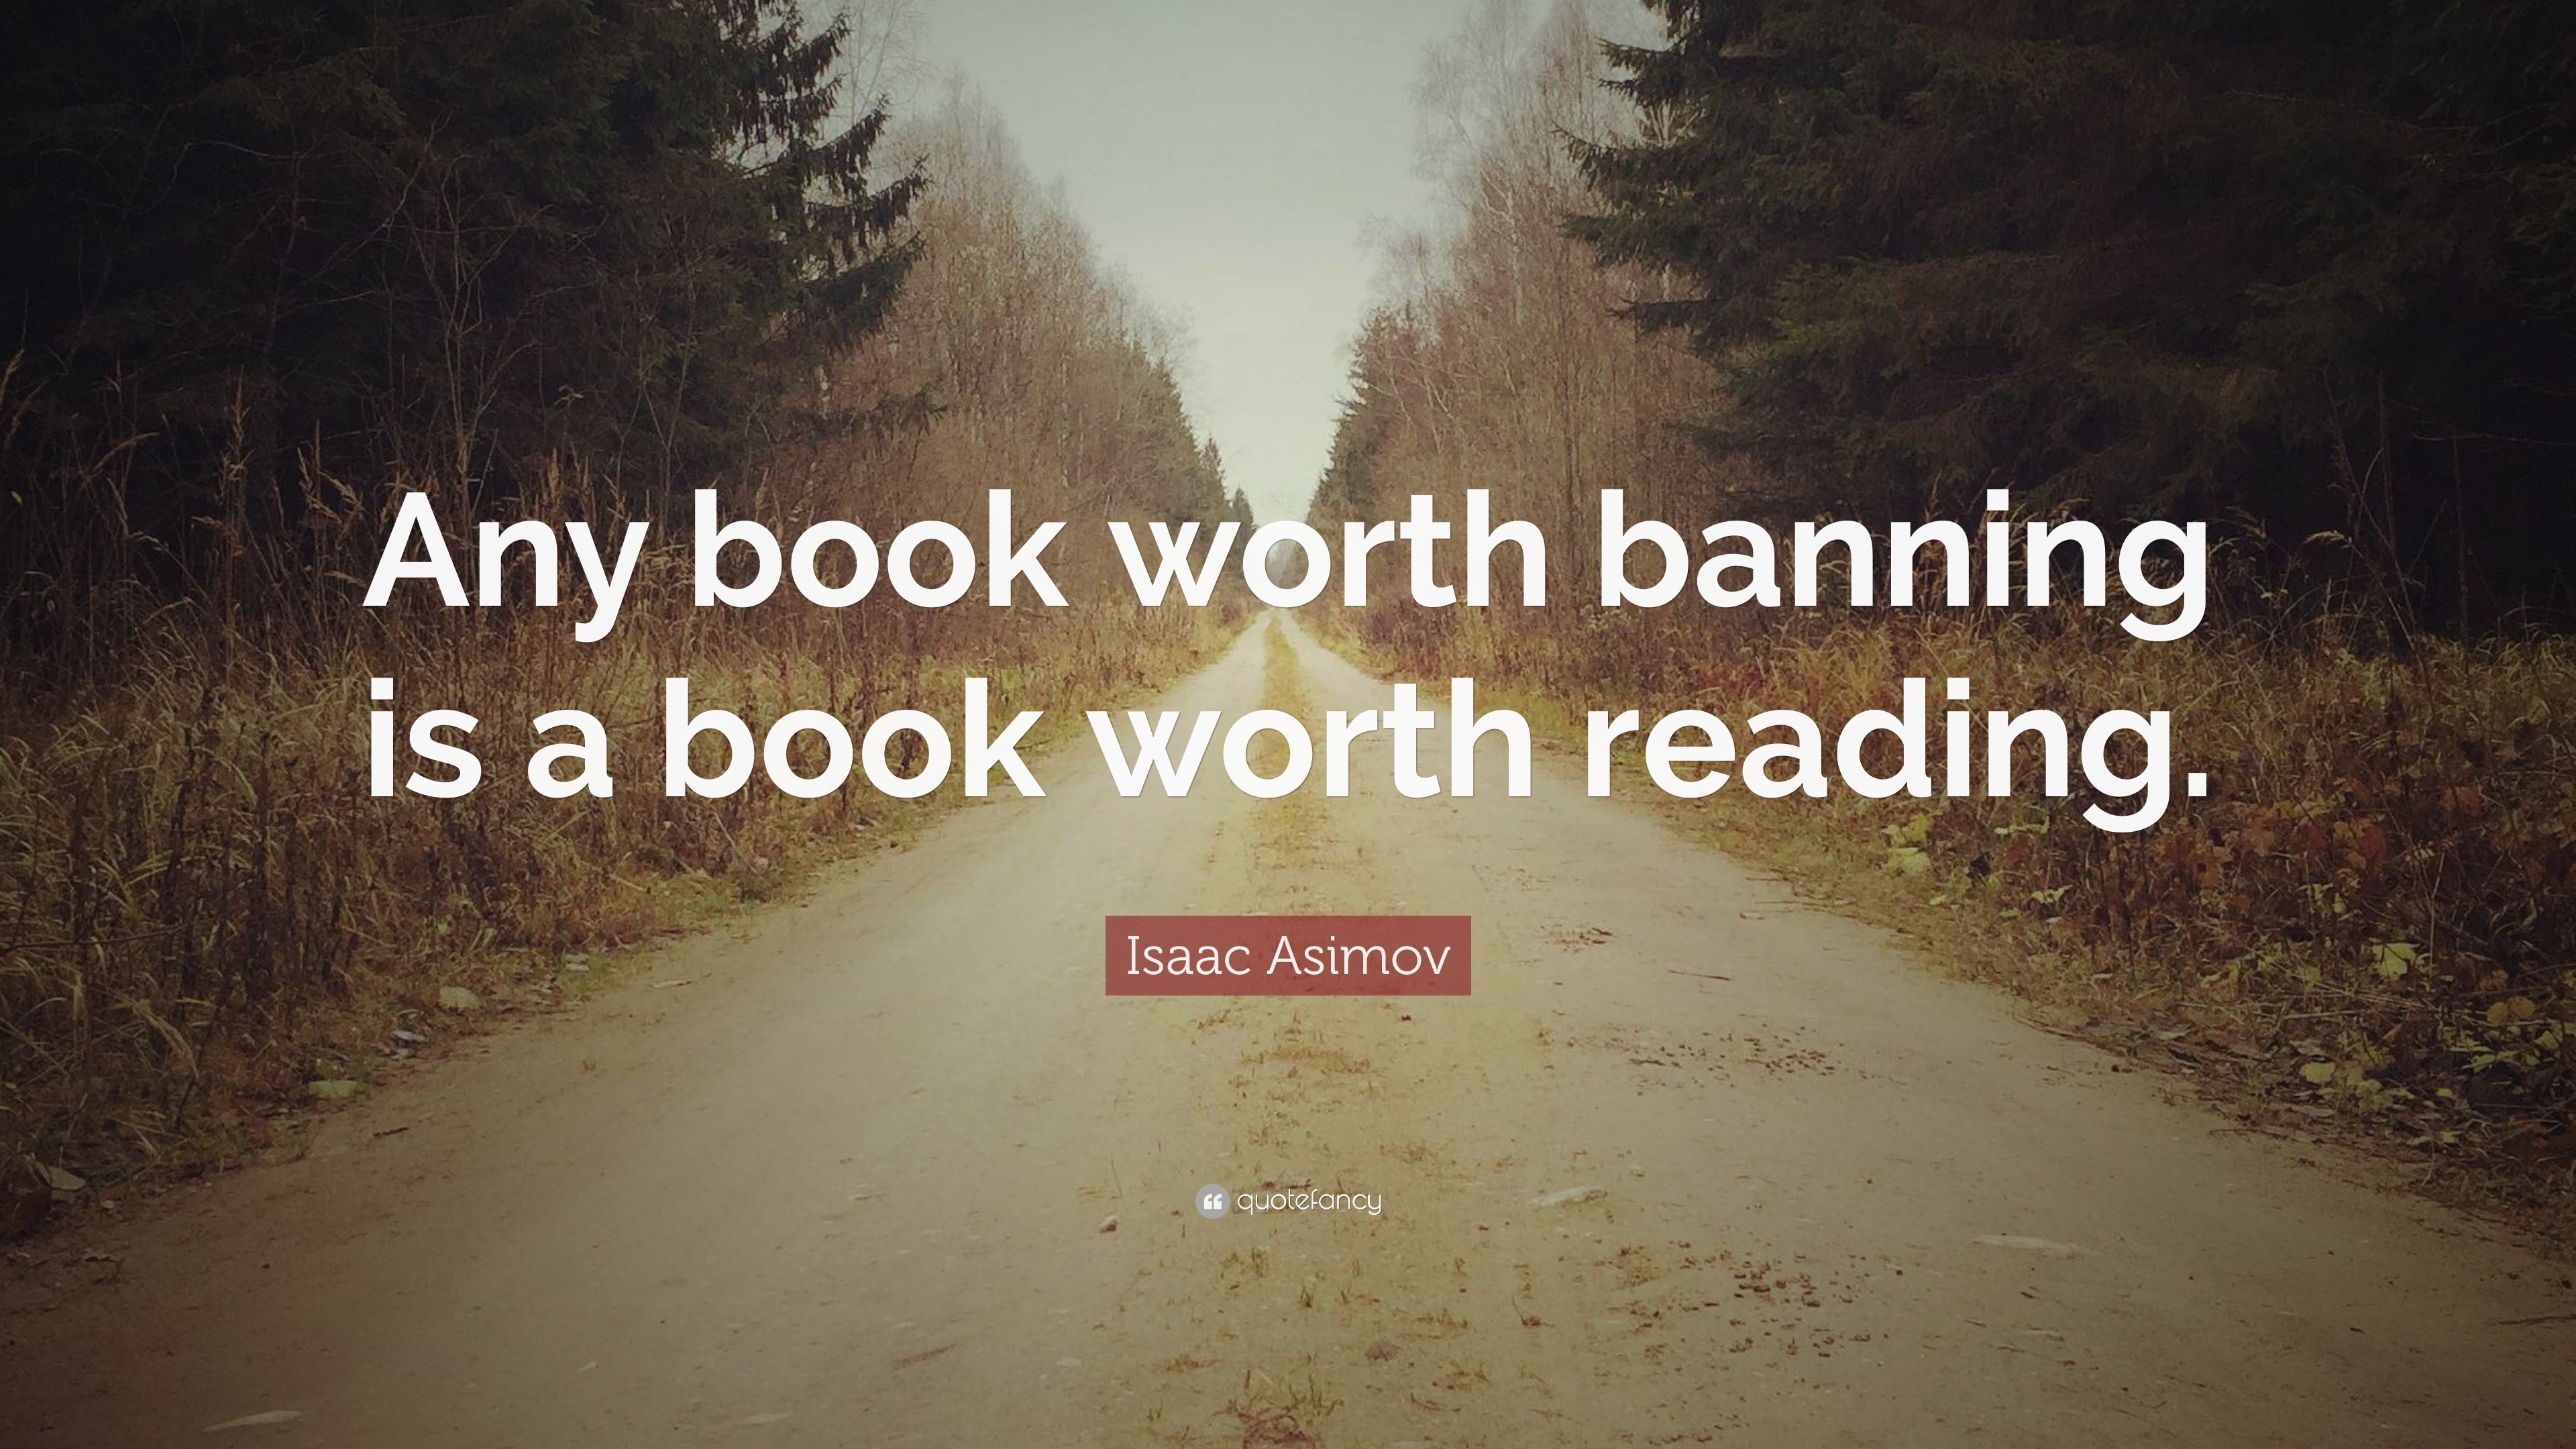 Isaac Asimov Quote: “Any book worth banning is a book worth reading.”